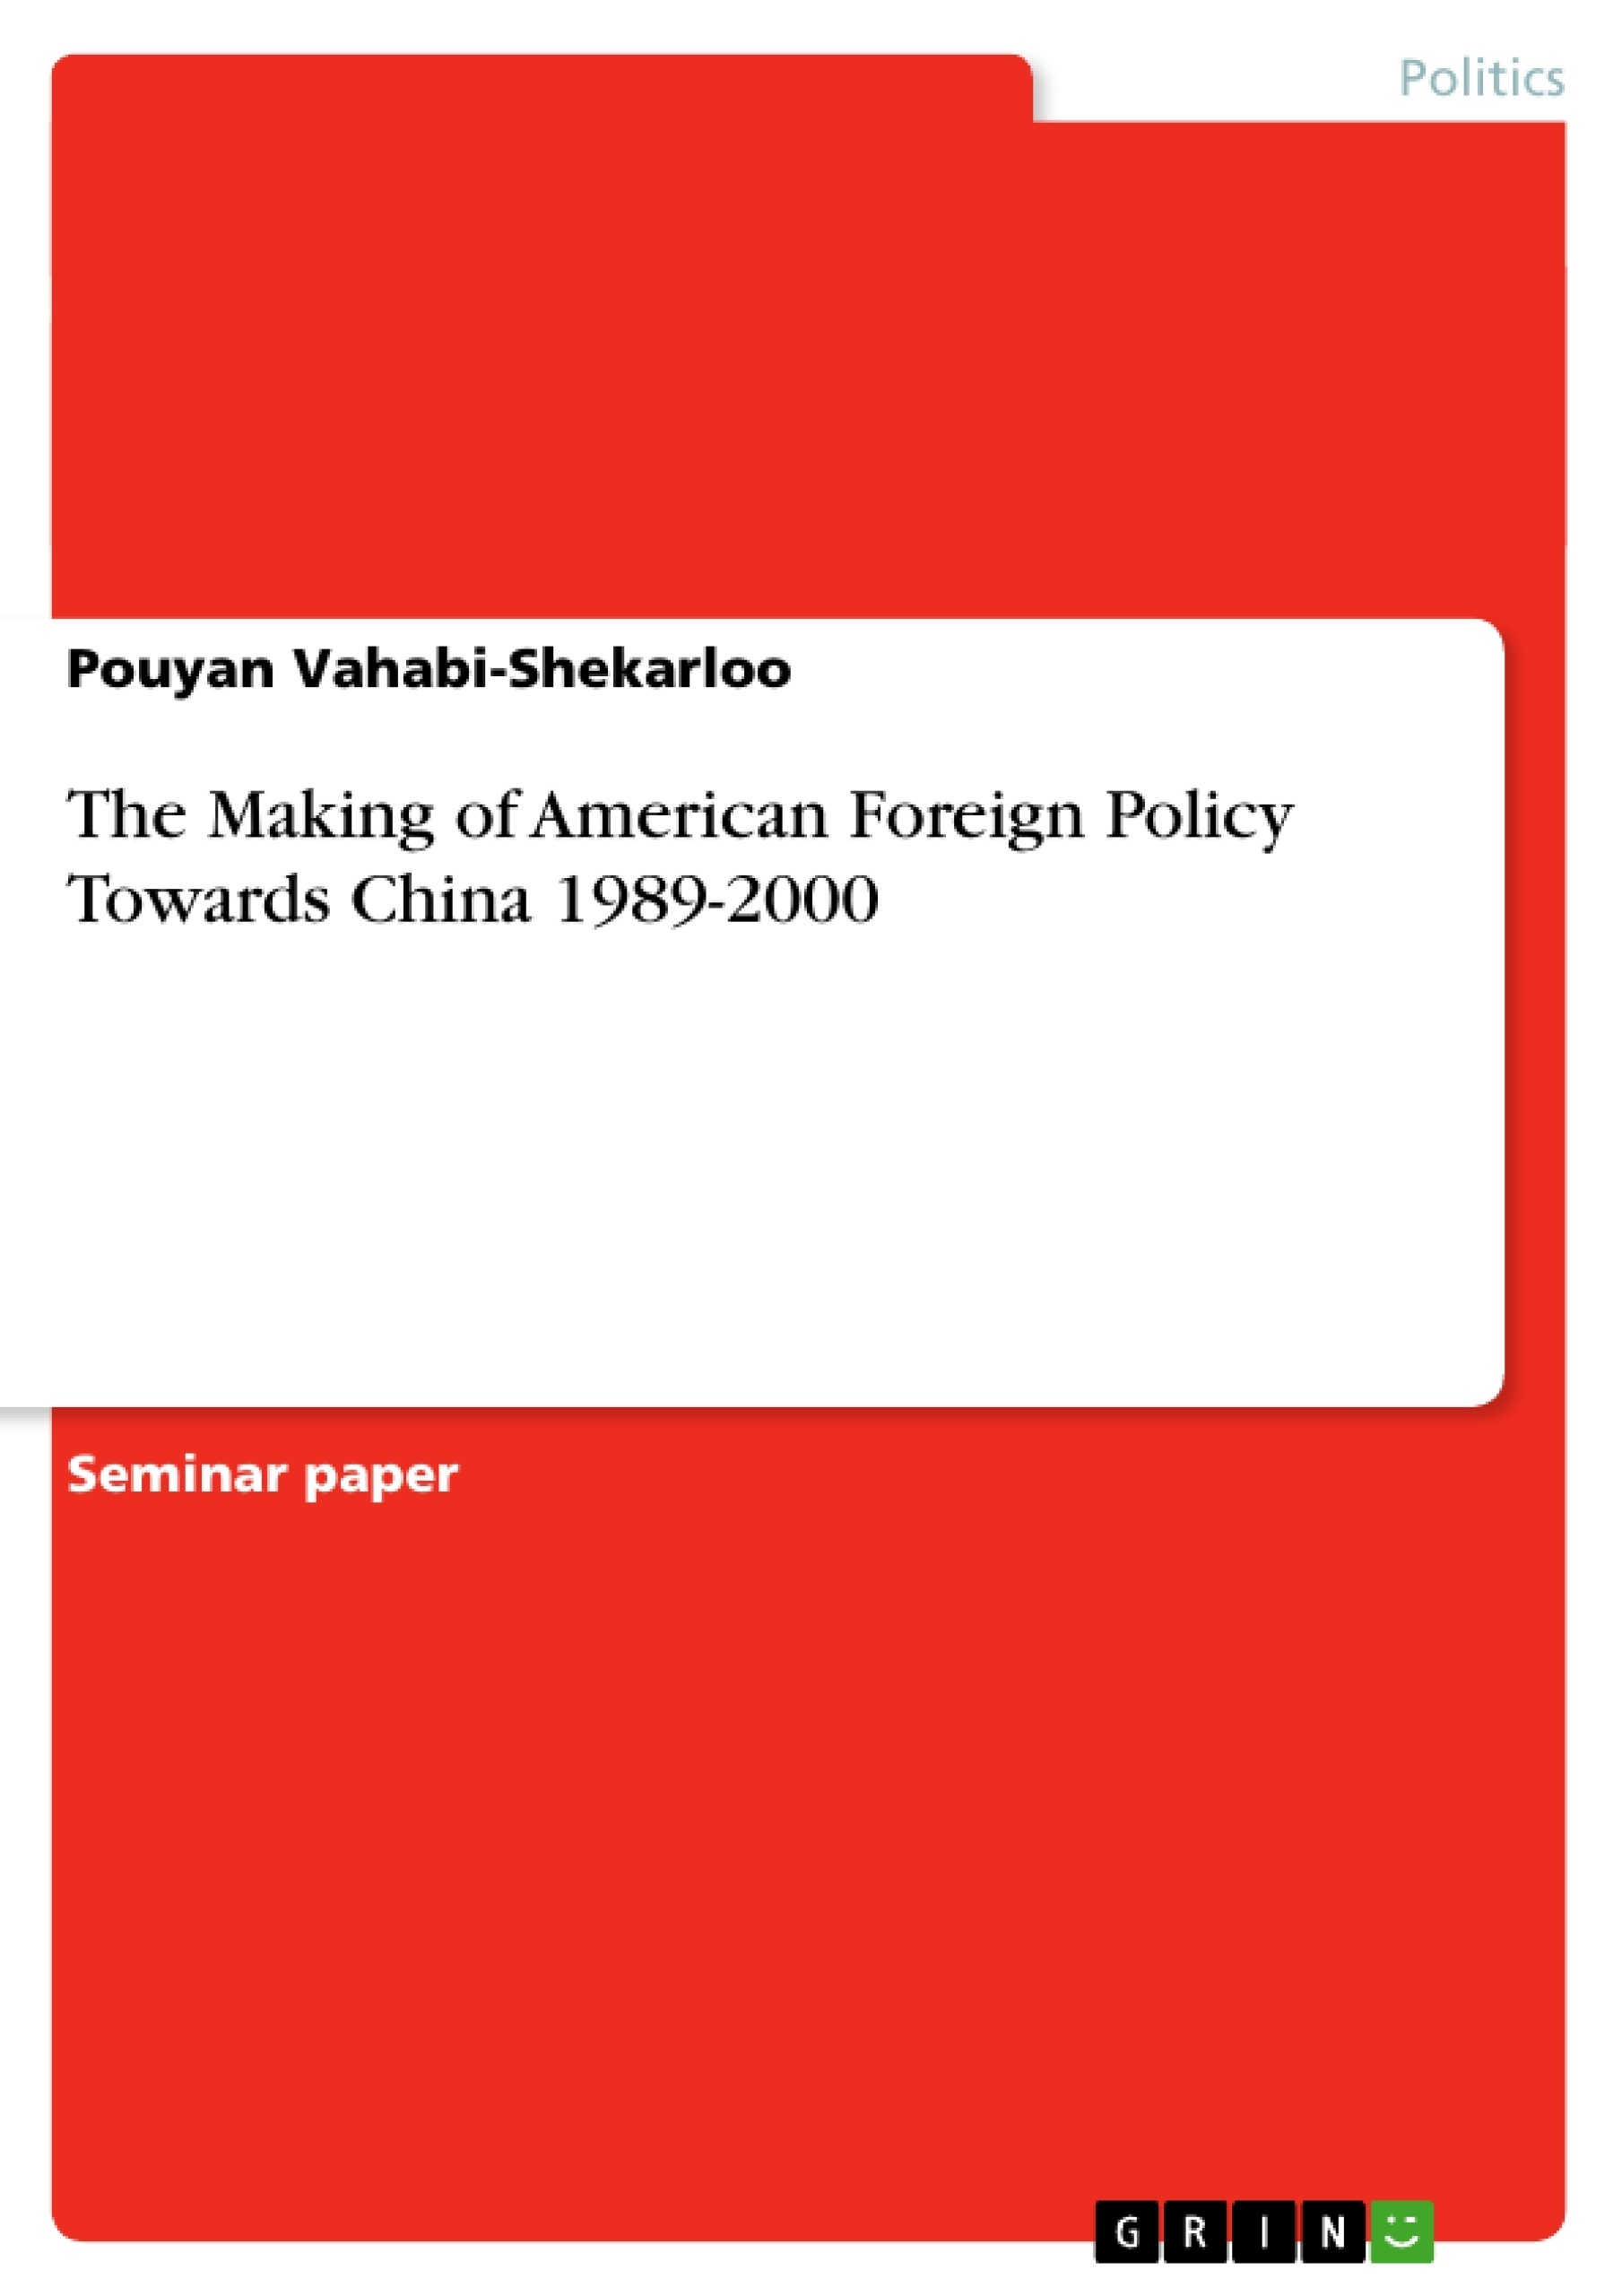 Title: The Making of American Foreign Policy Towards China 1989-2000